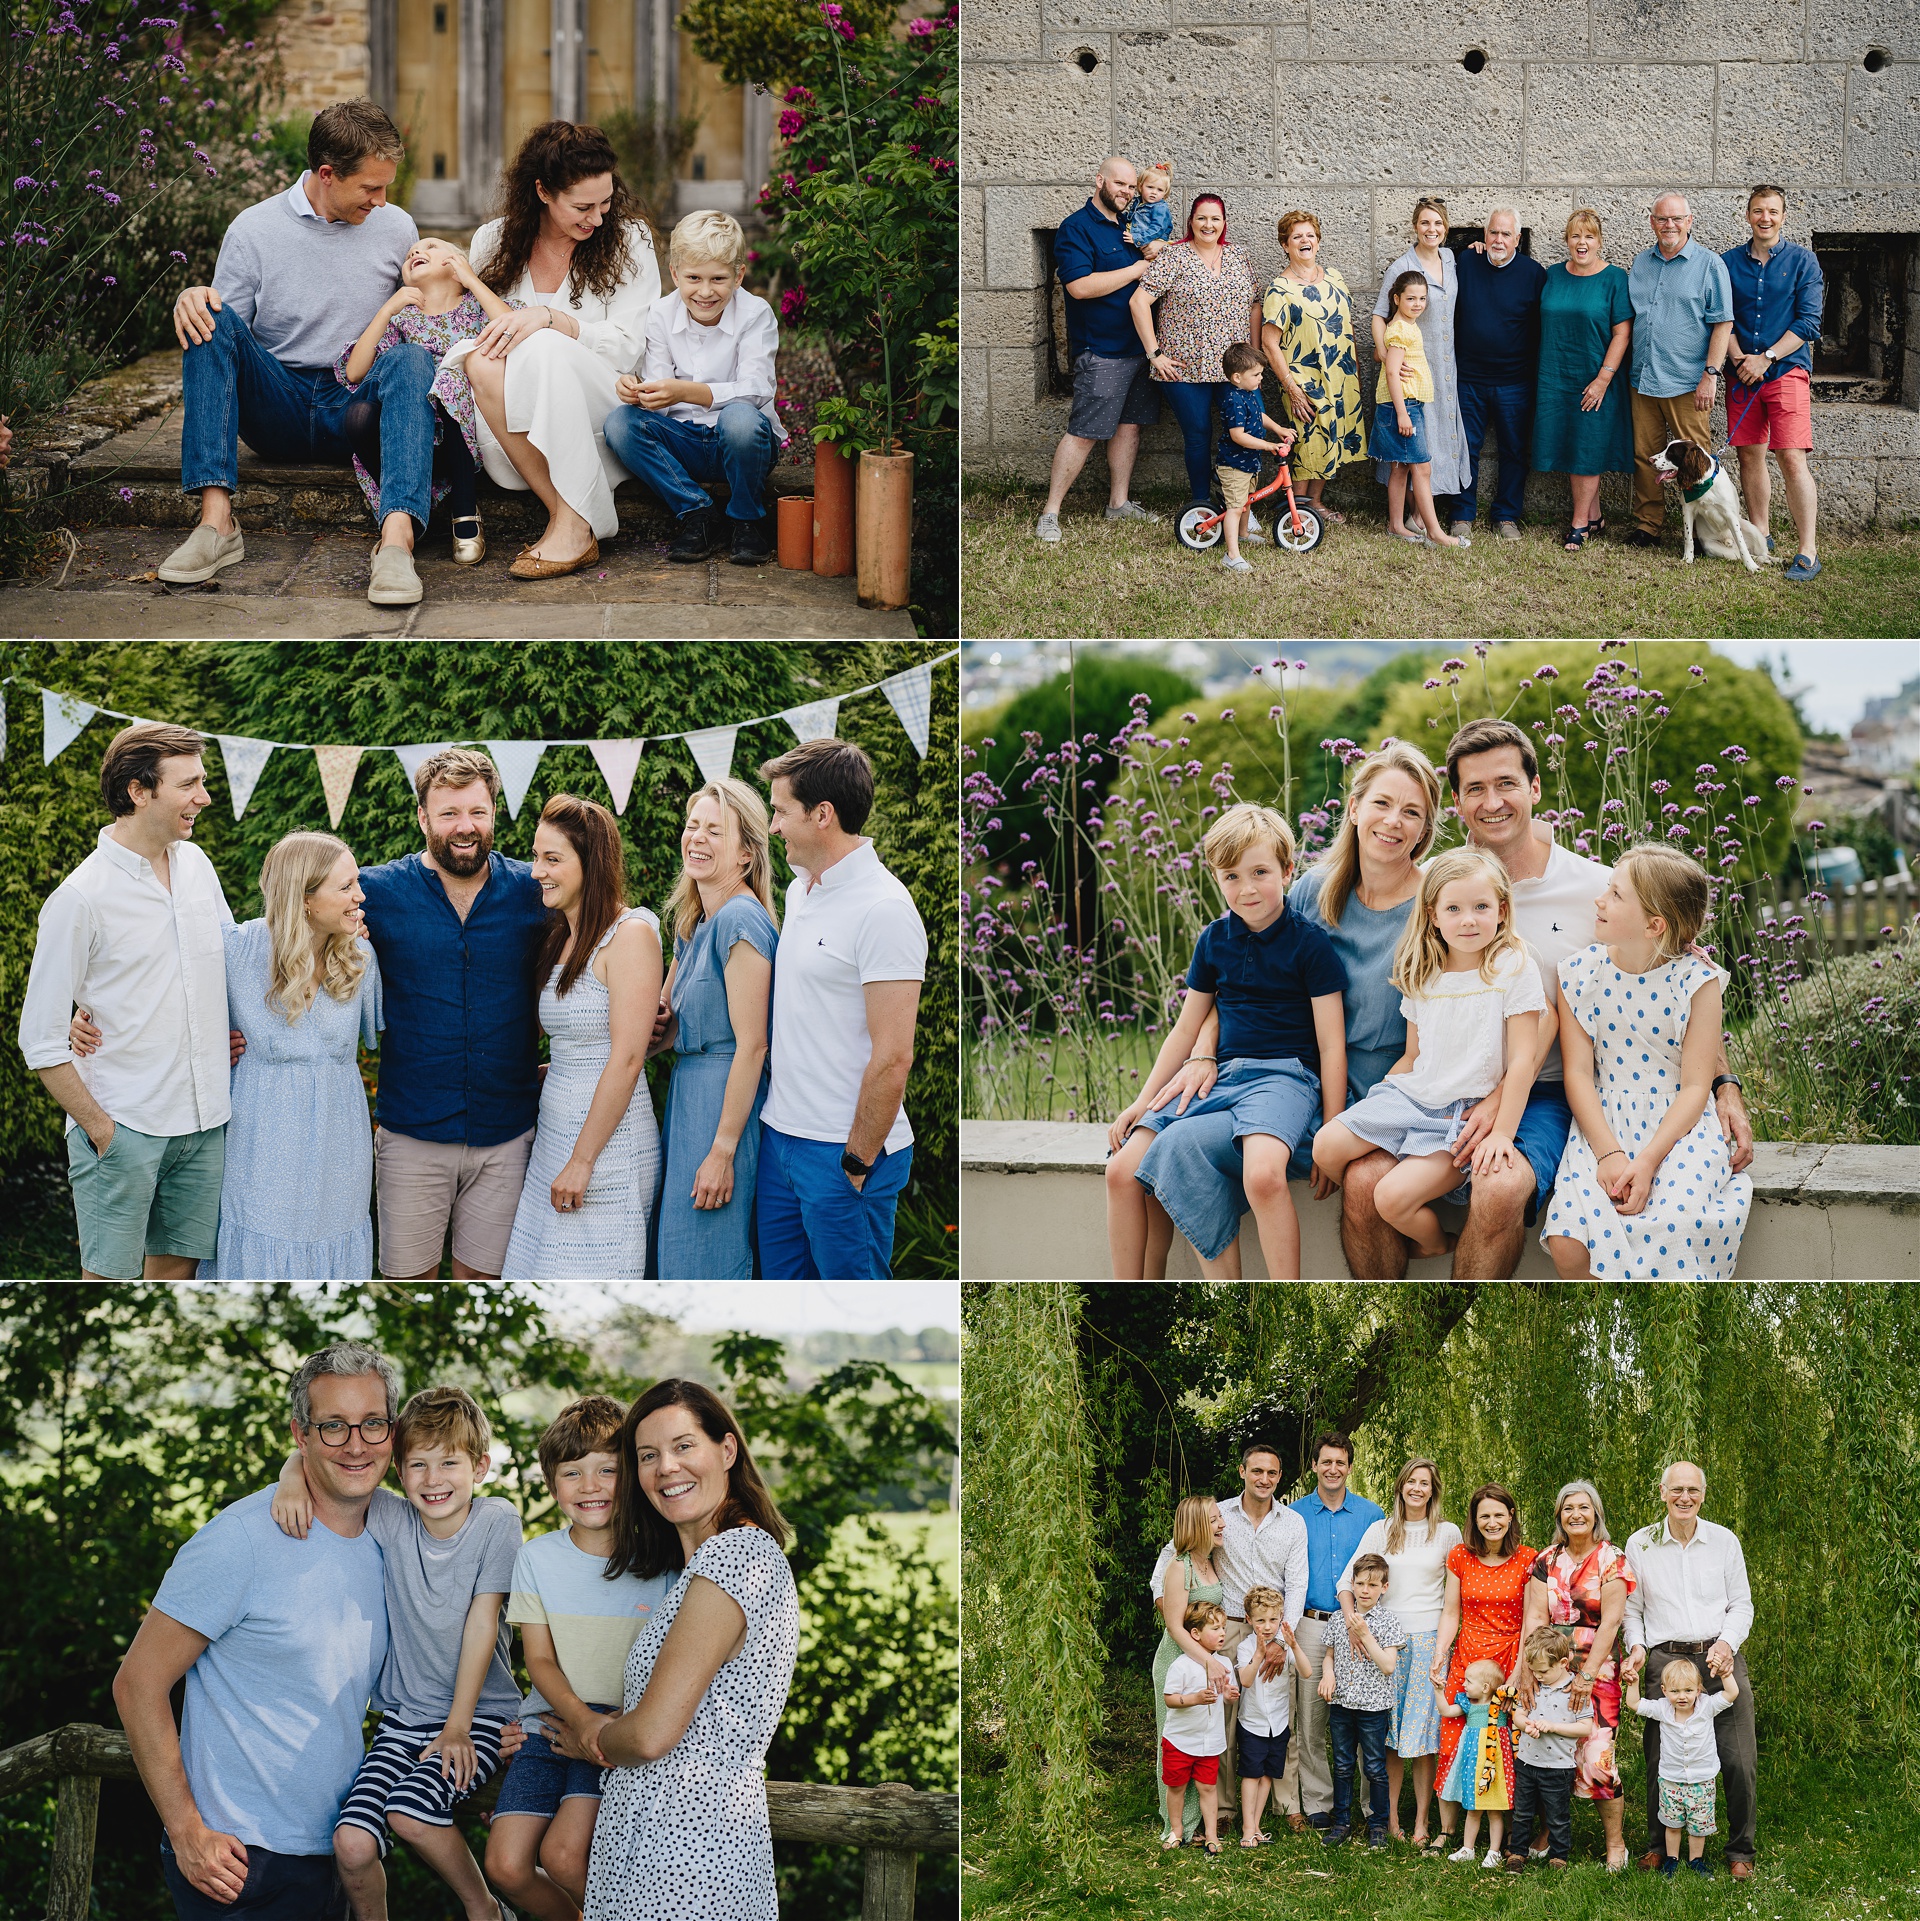 Series of family photography group portraits